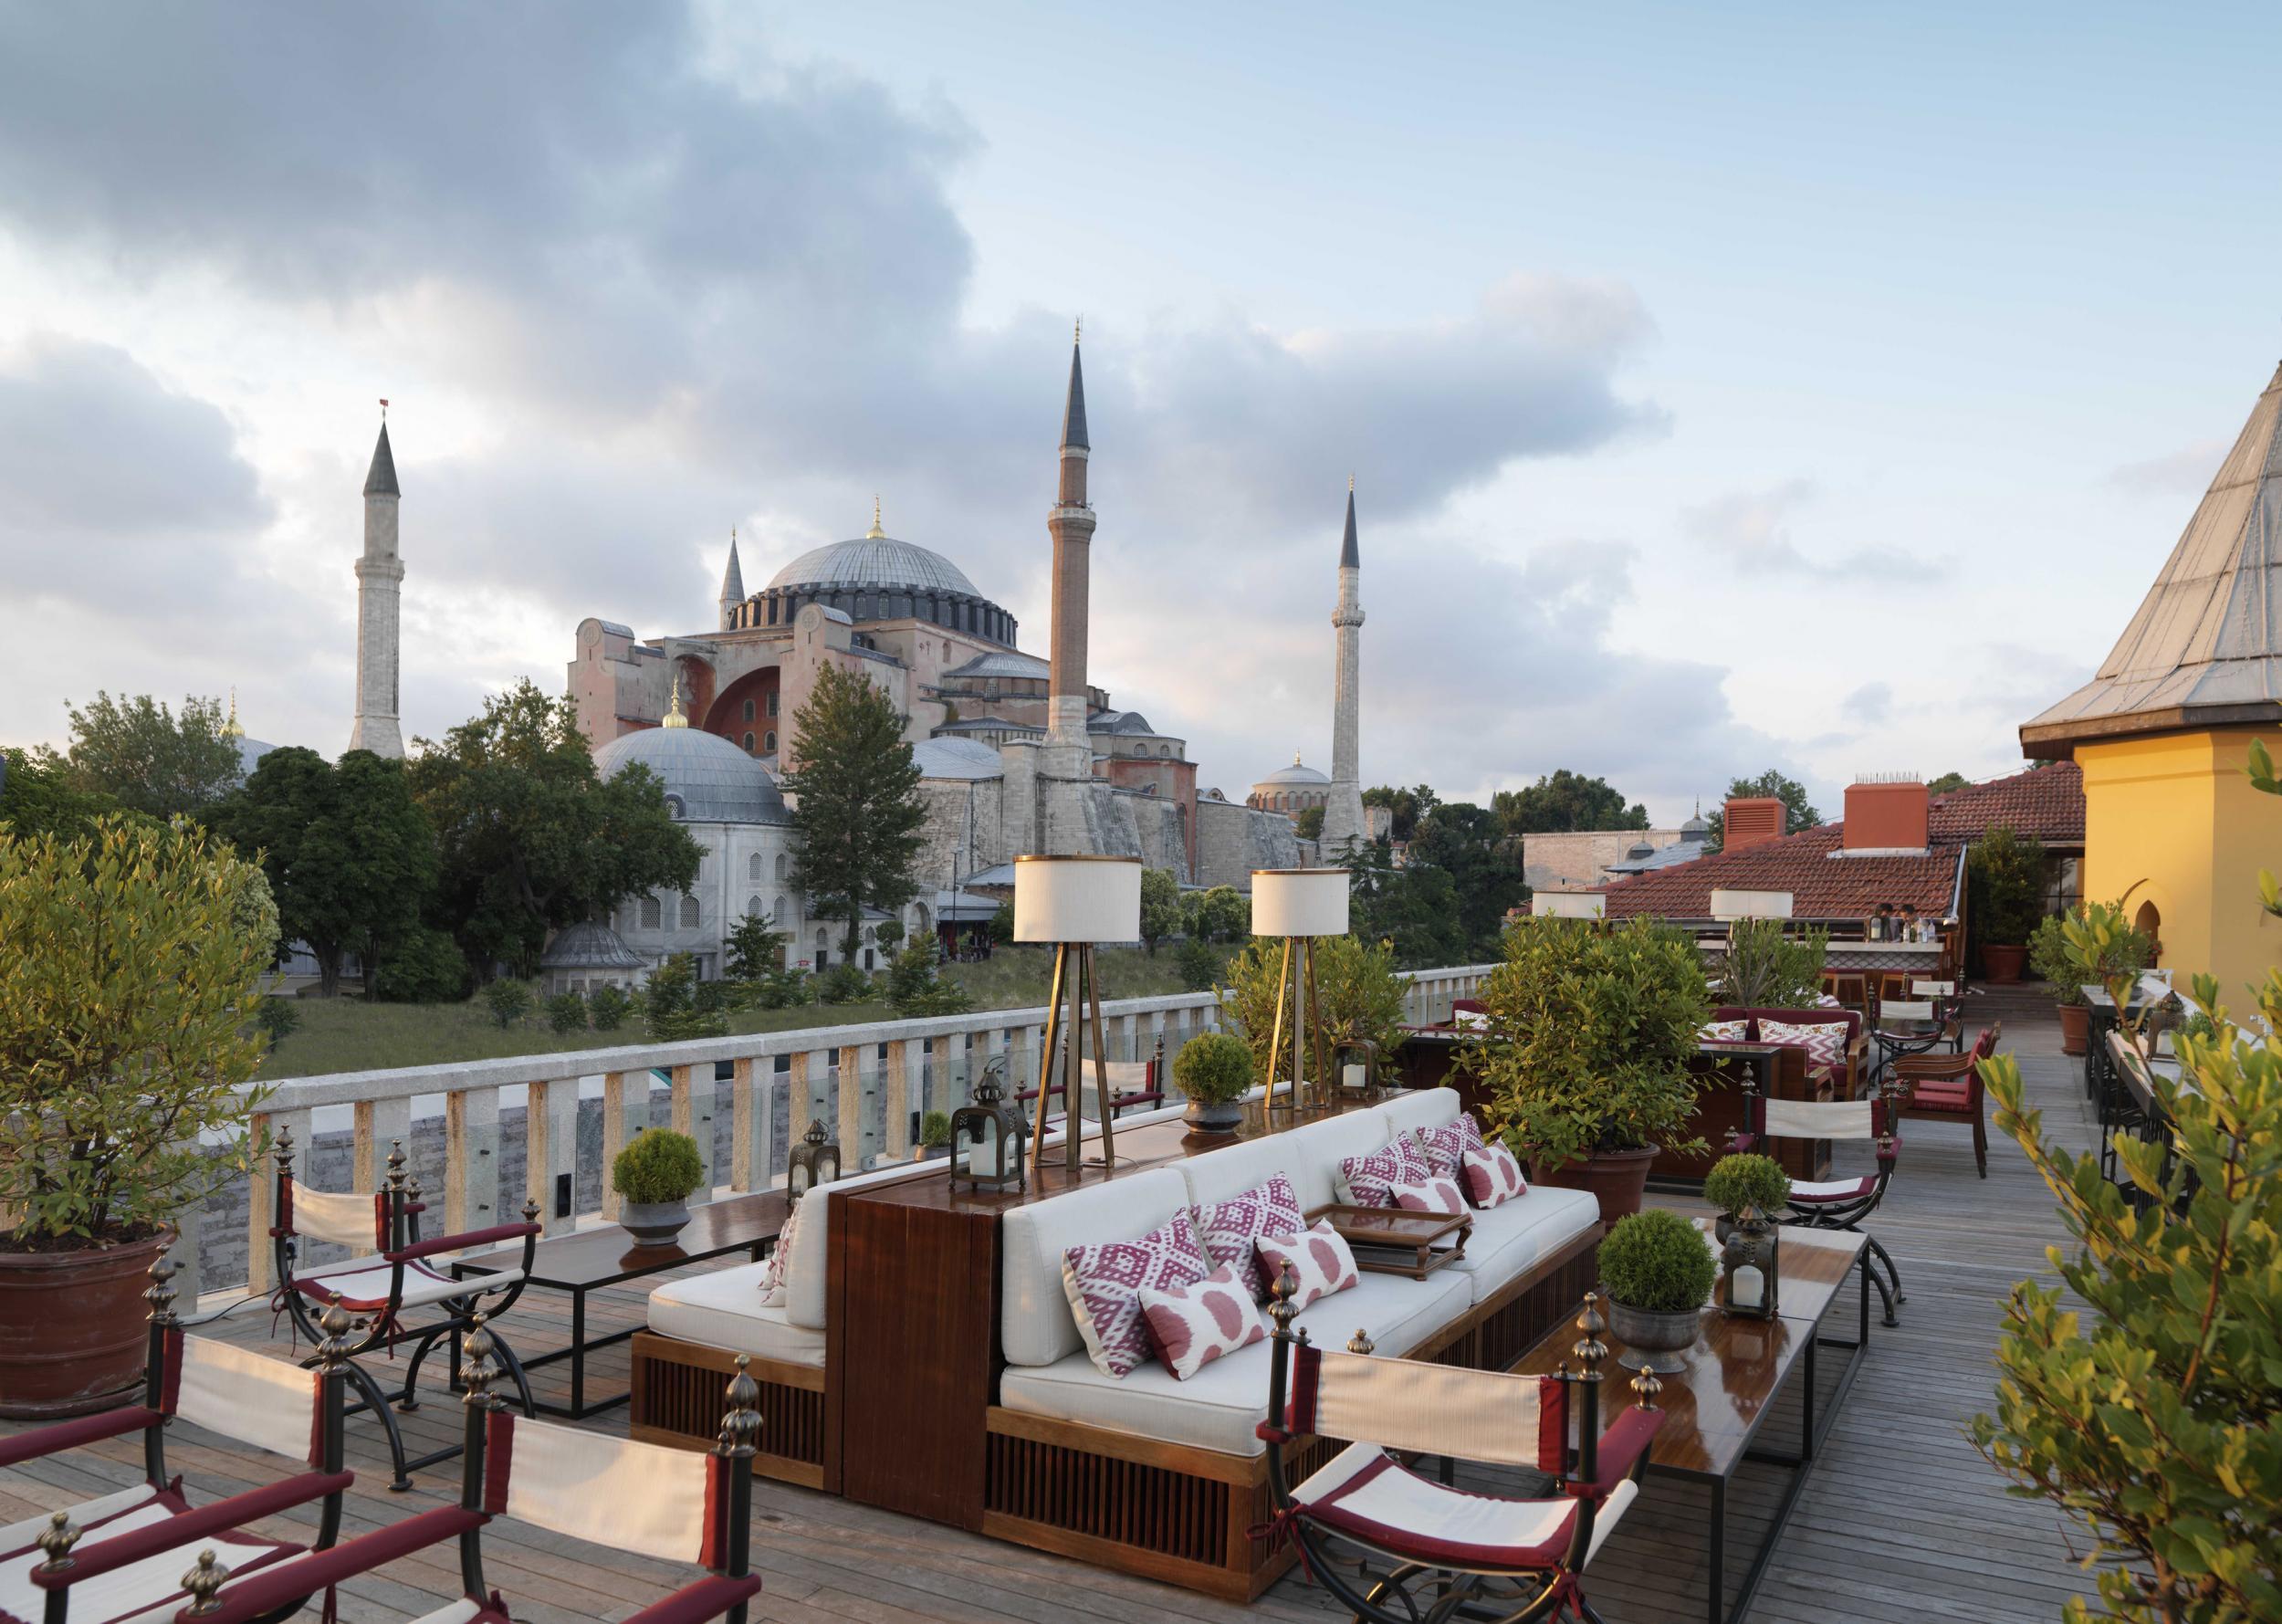 A sumptuous hotel with incredible views of Hagia Sophia and the Blue Mosque